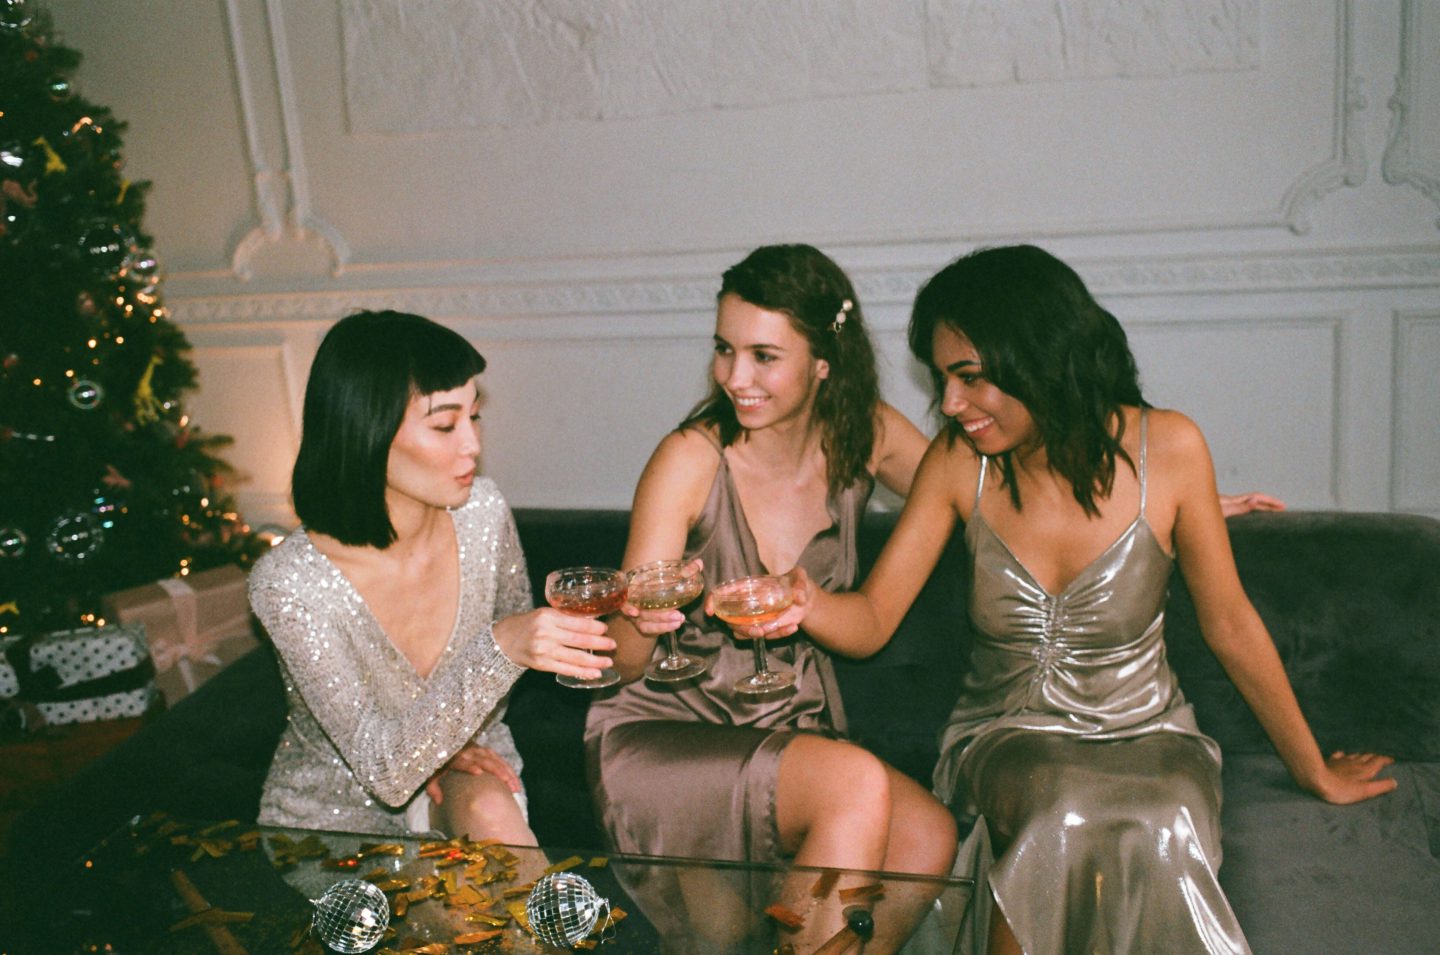 Three women sat on a sofa in evening cocktail dresses next to a Christmas tree